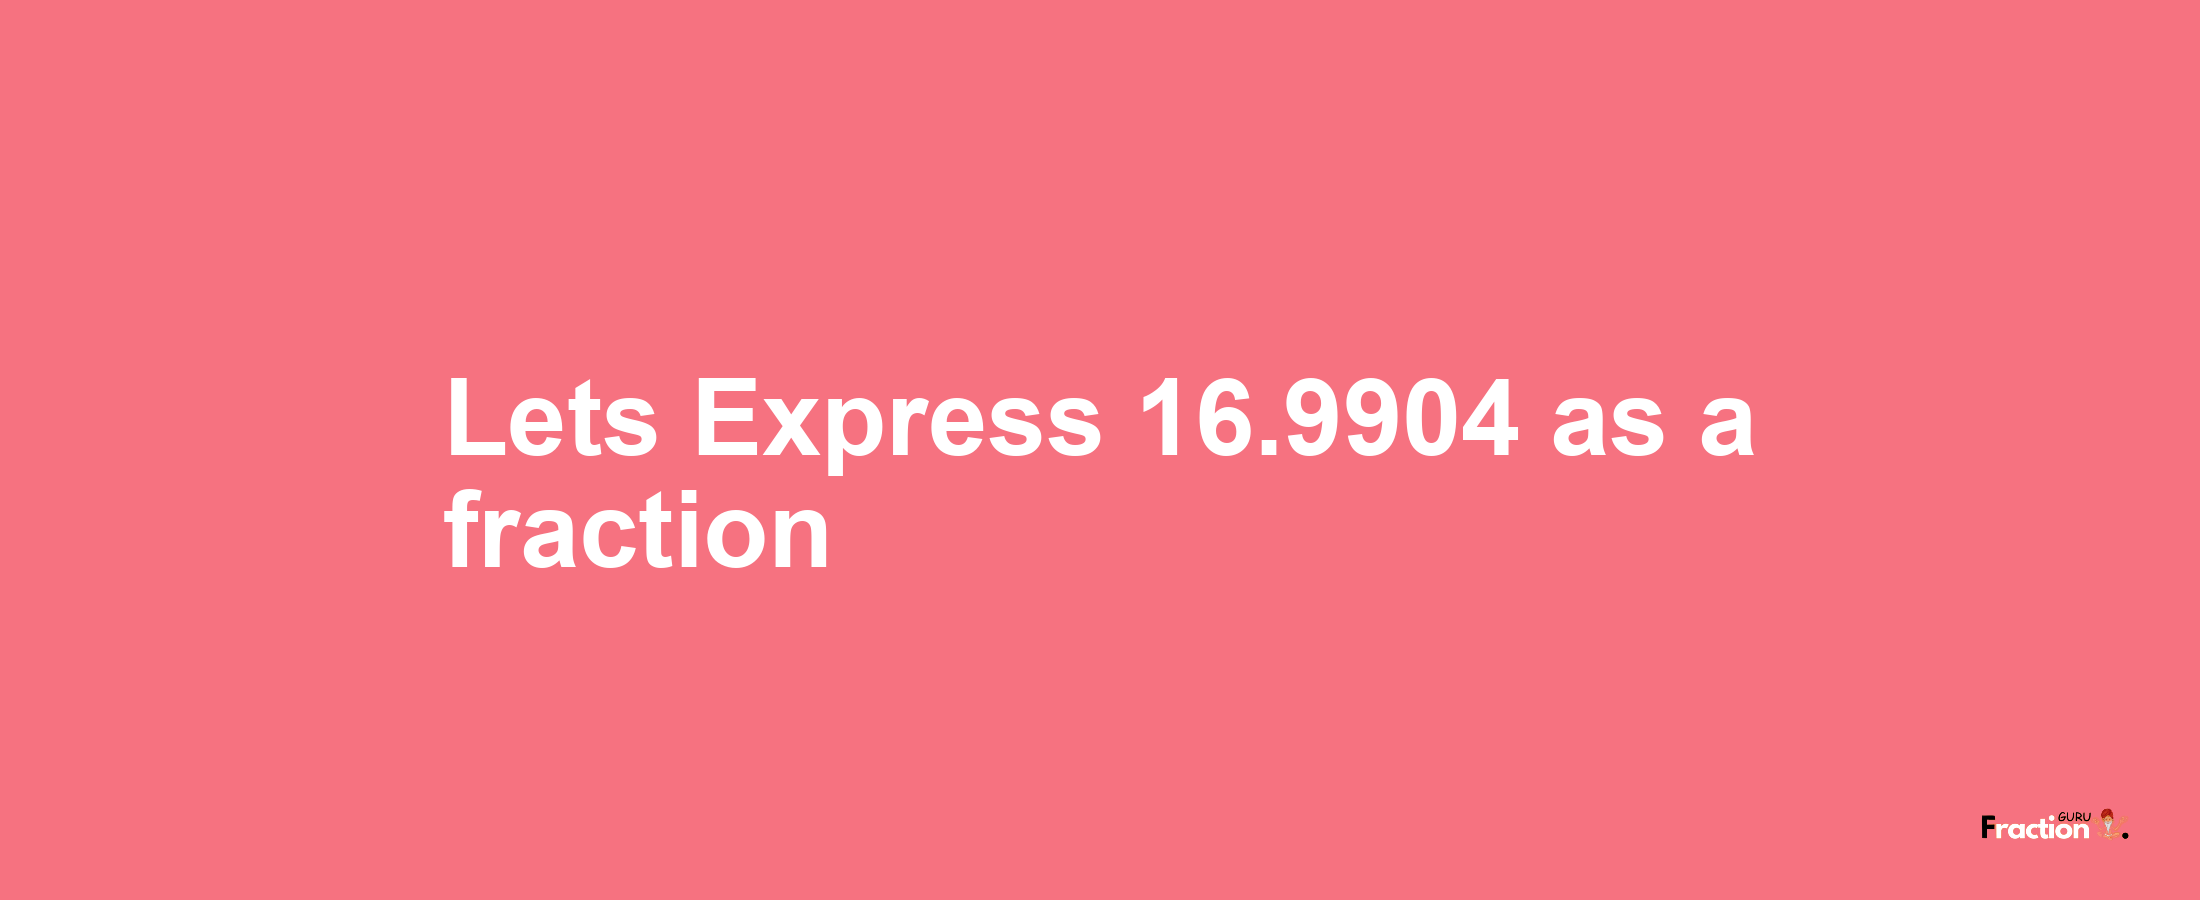 Lets Express 16.9904 as afraction